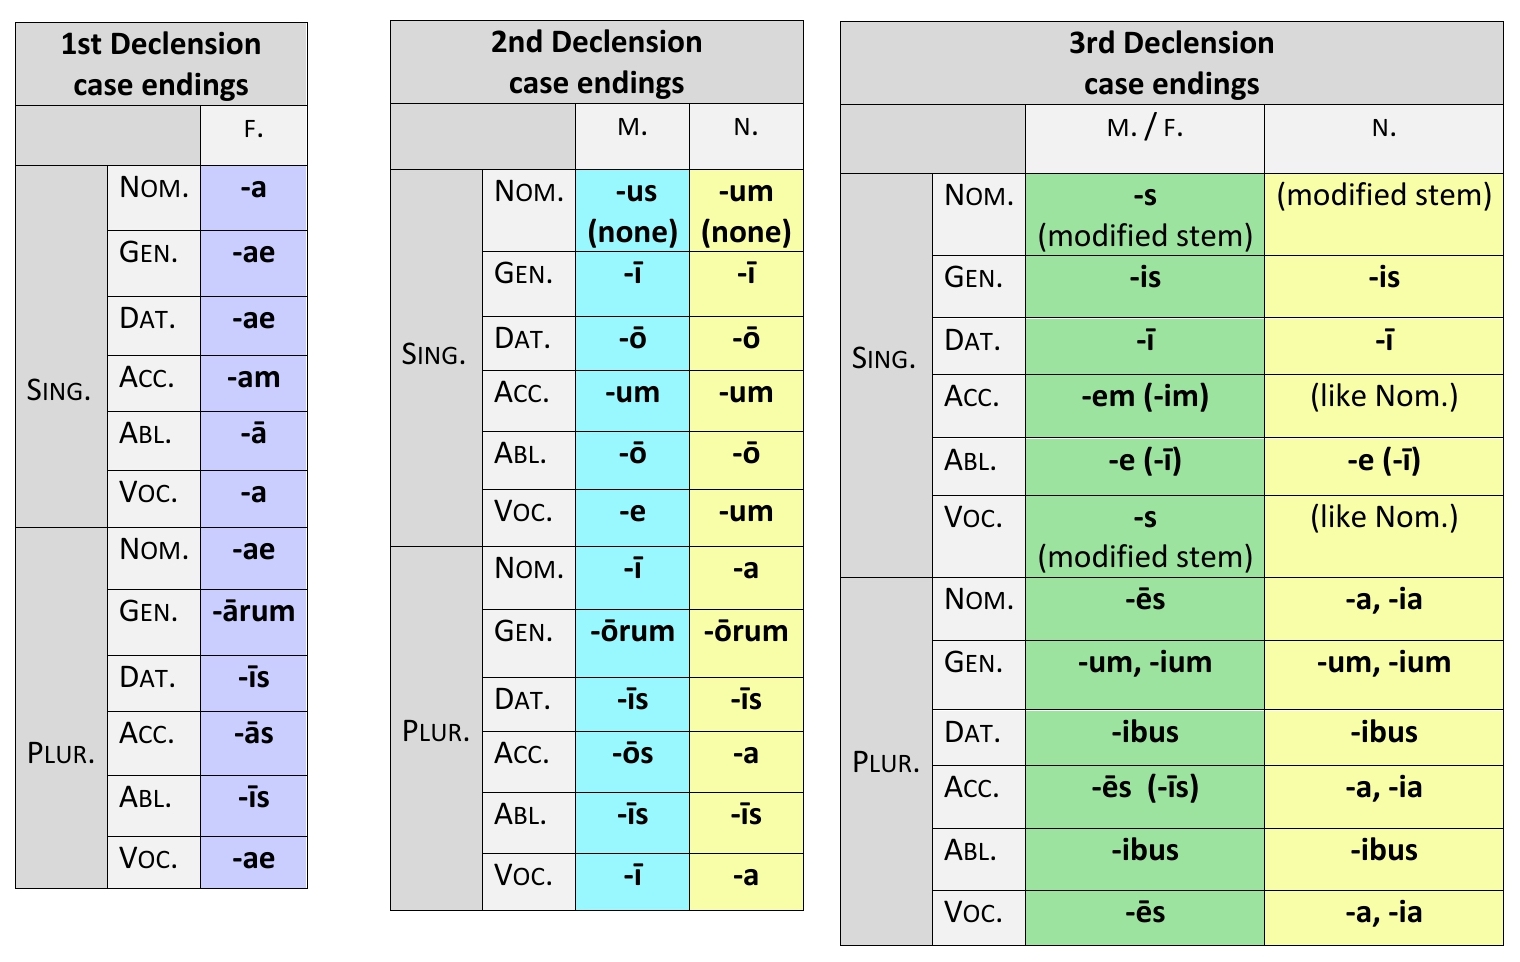 case endings of the first, second, and third declensions